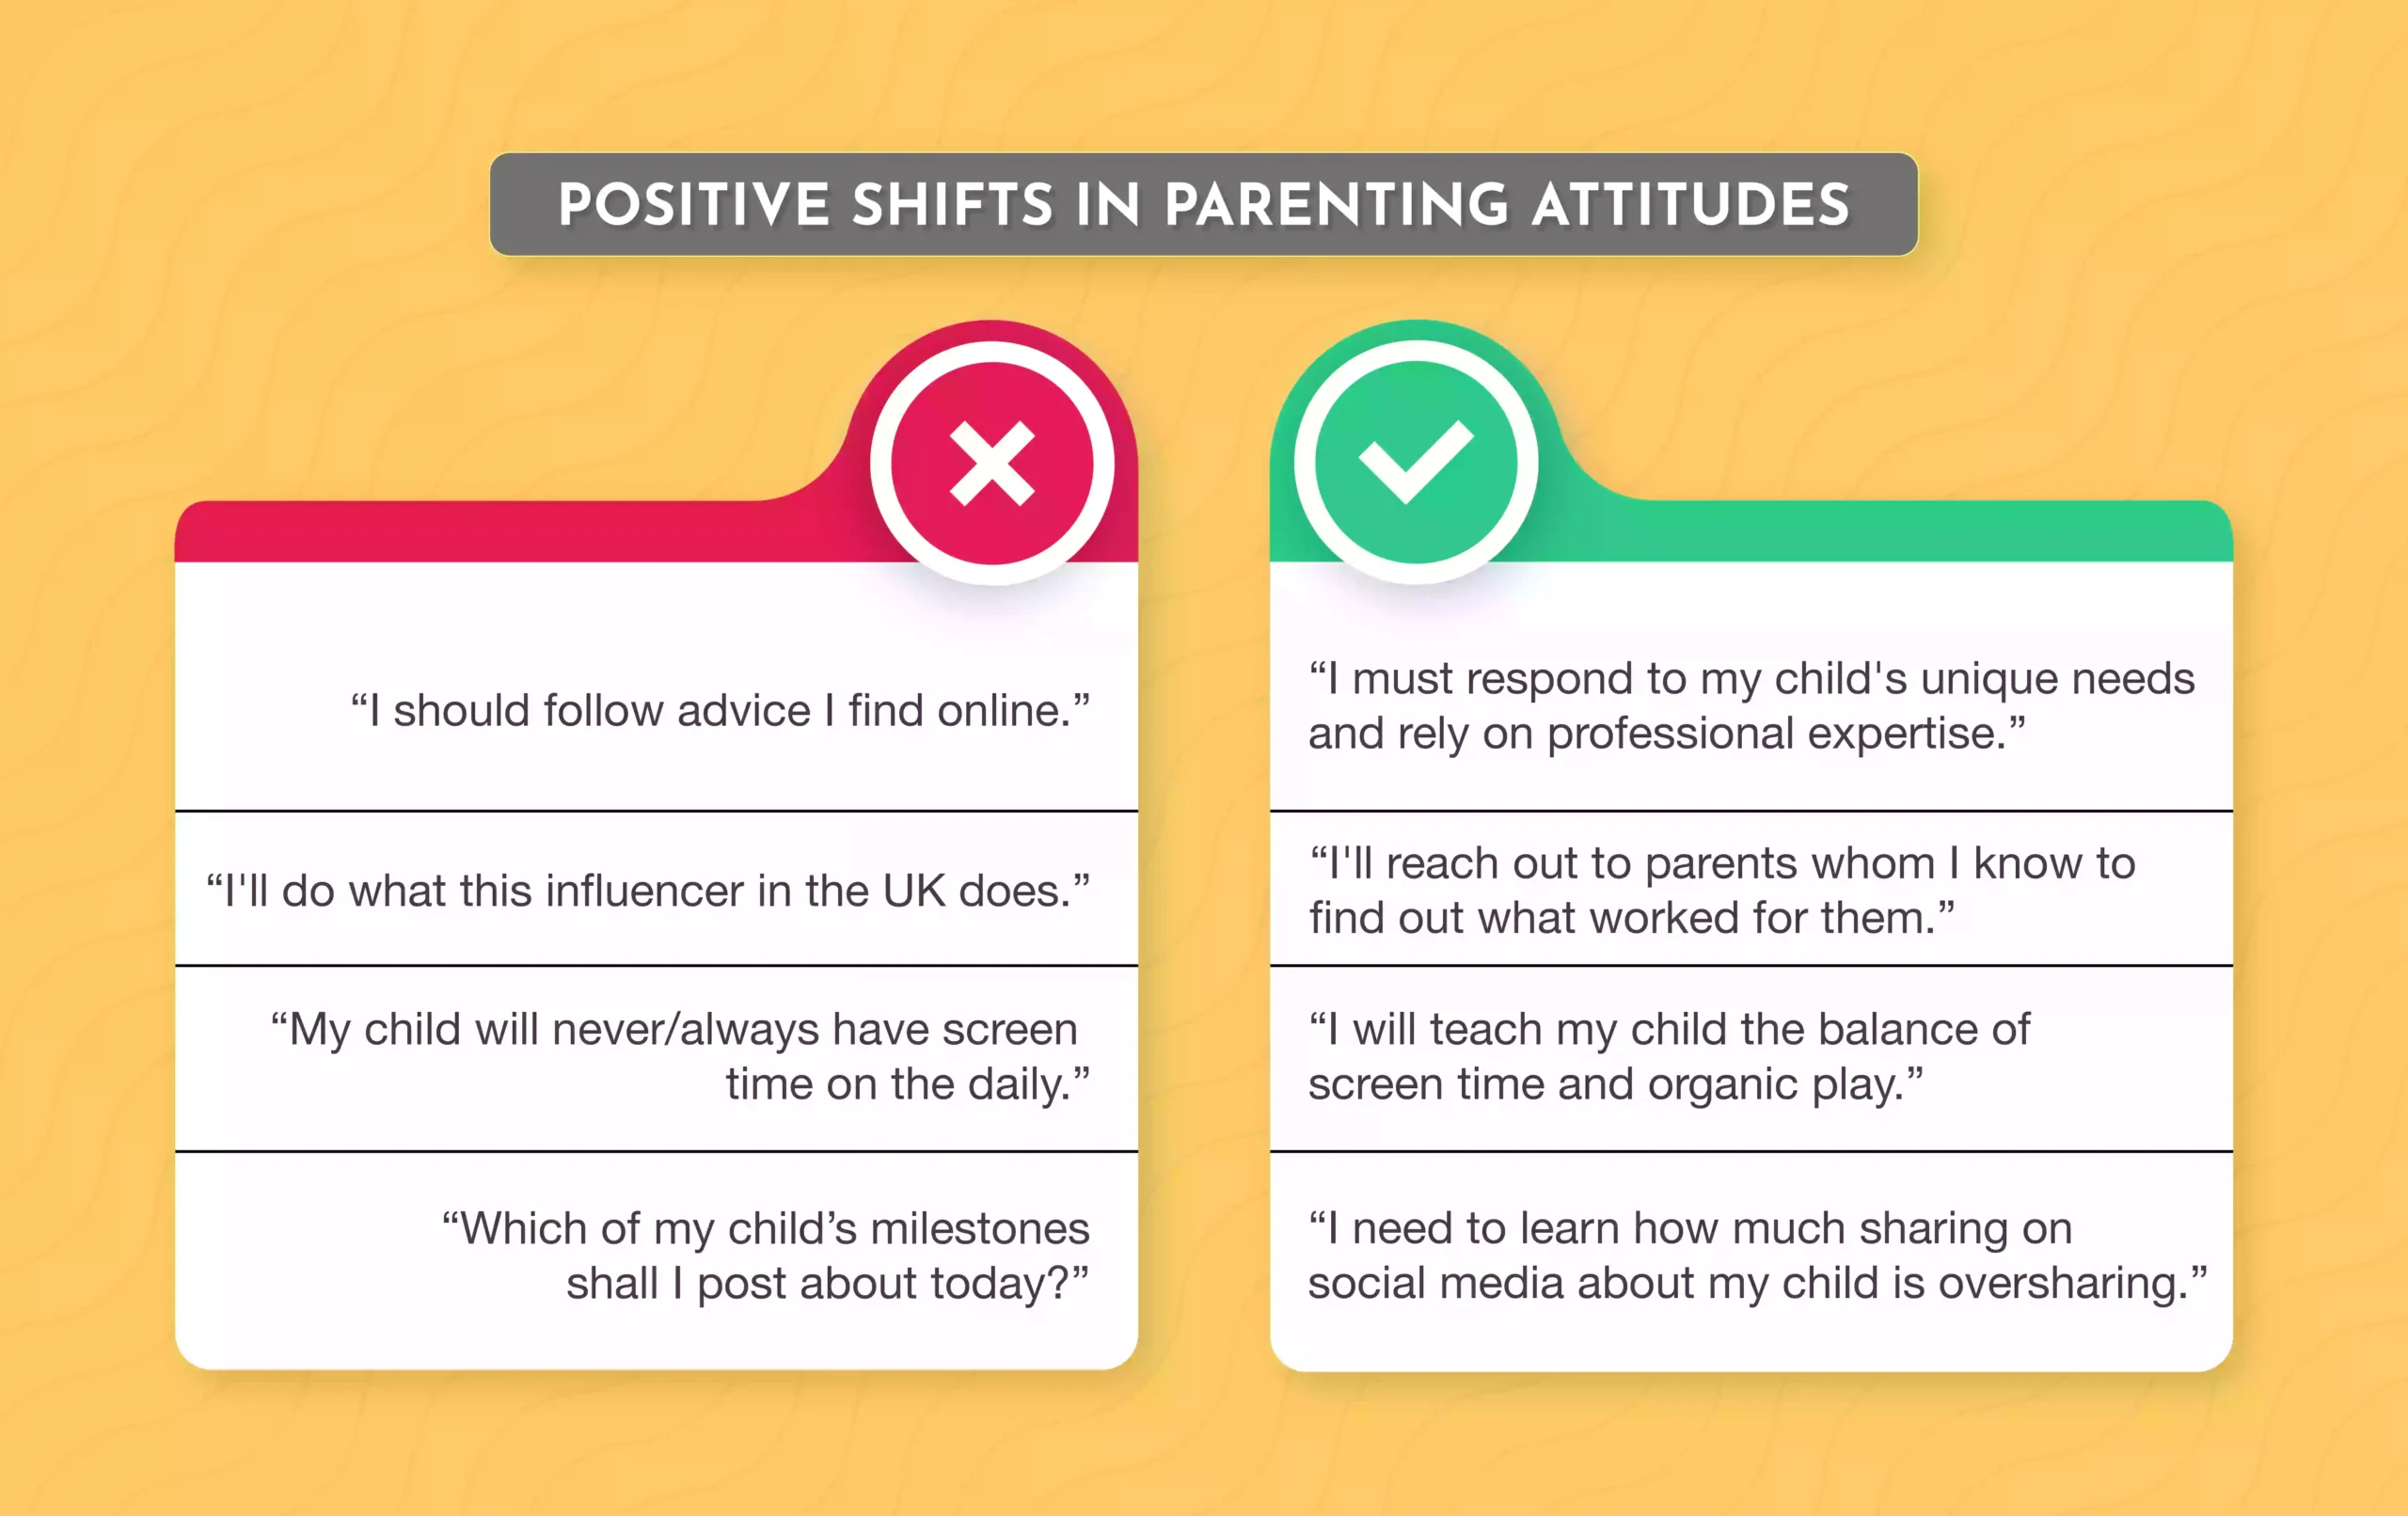 Positive shifts in parenting attitudes